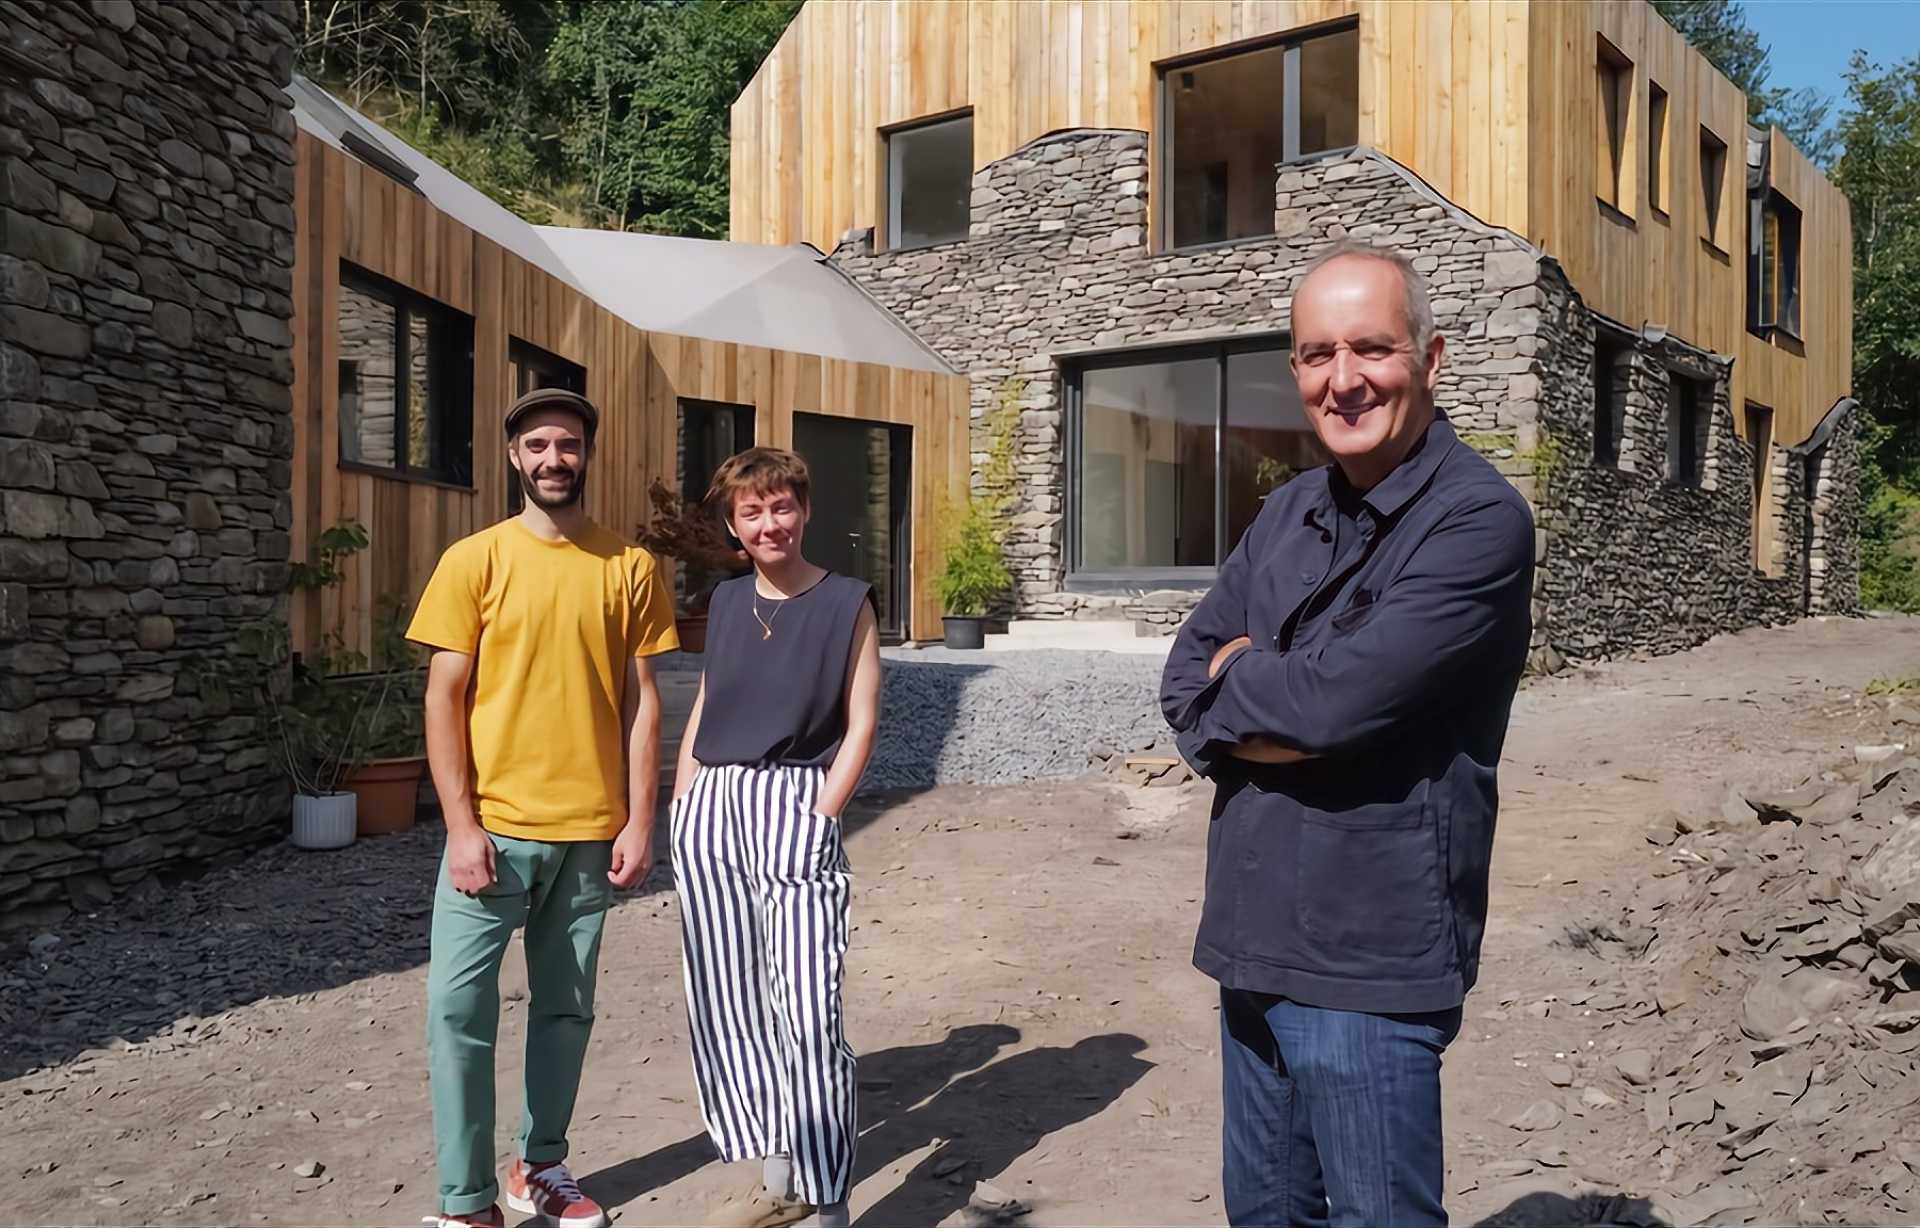 Modern contemporary glazing installed the lake district for Channel 4 TV's Grand Designs